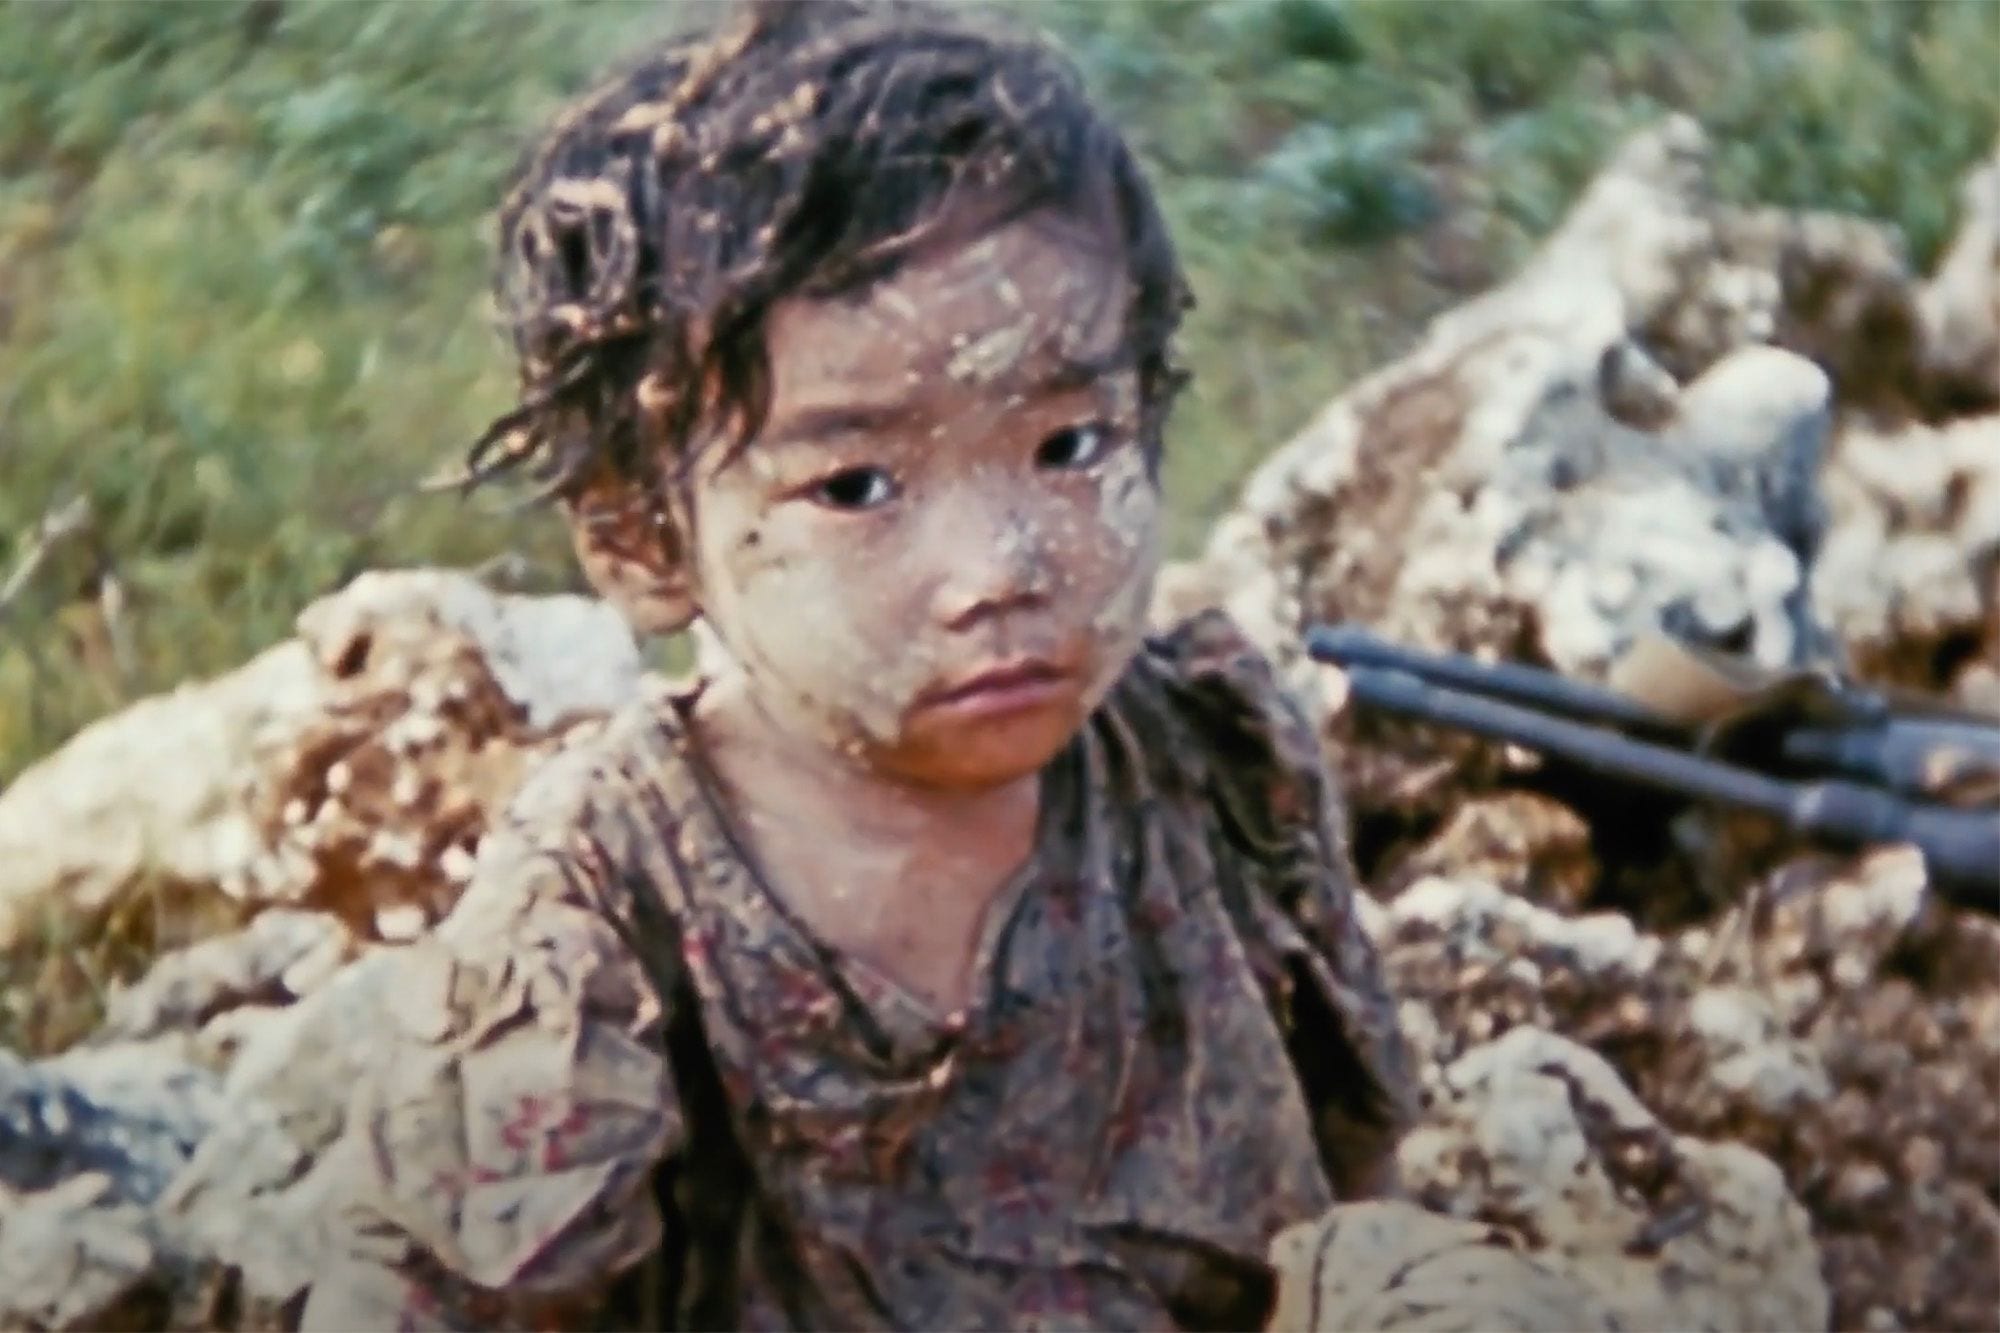 Apocalypse ’45 Uses Gloriously Restored Footage to Reveal the Ugliest Side of Our Nature